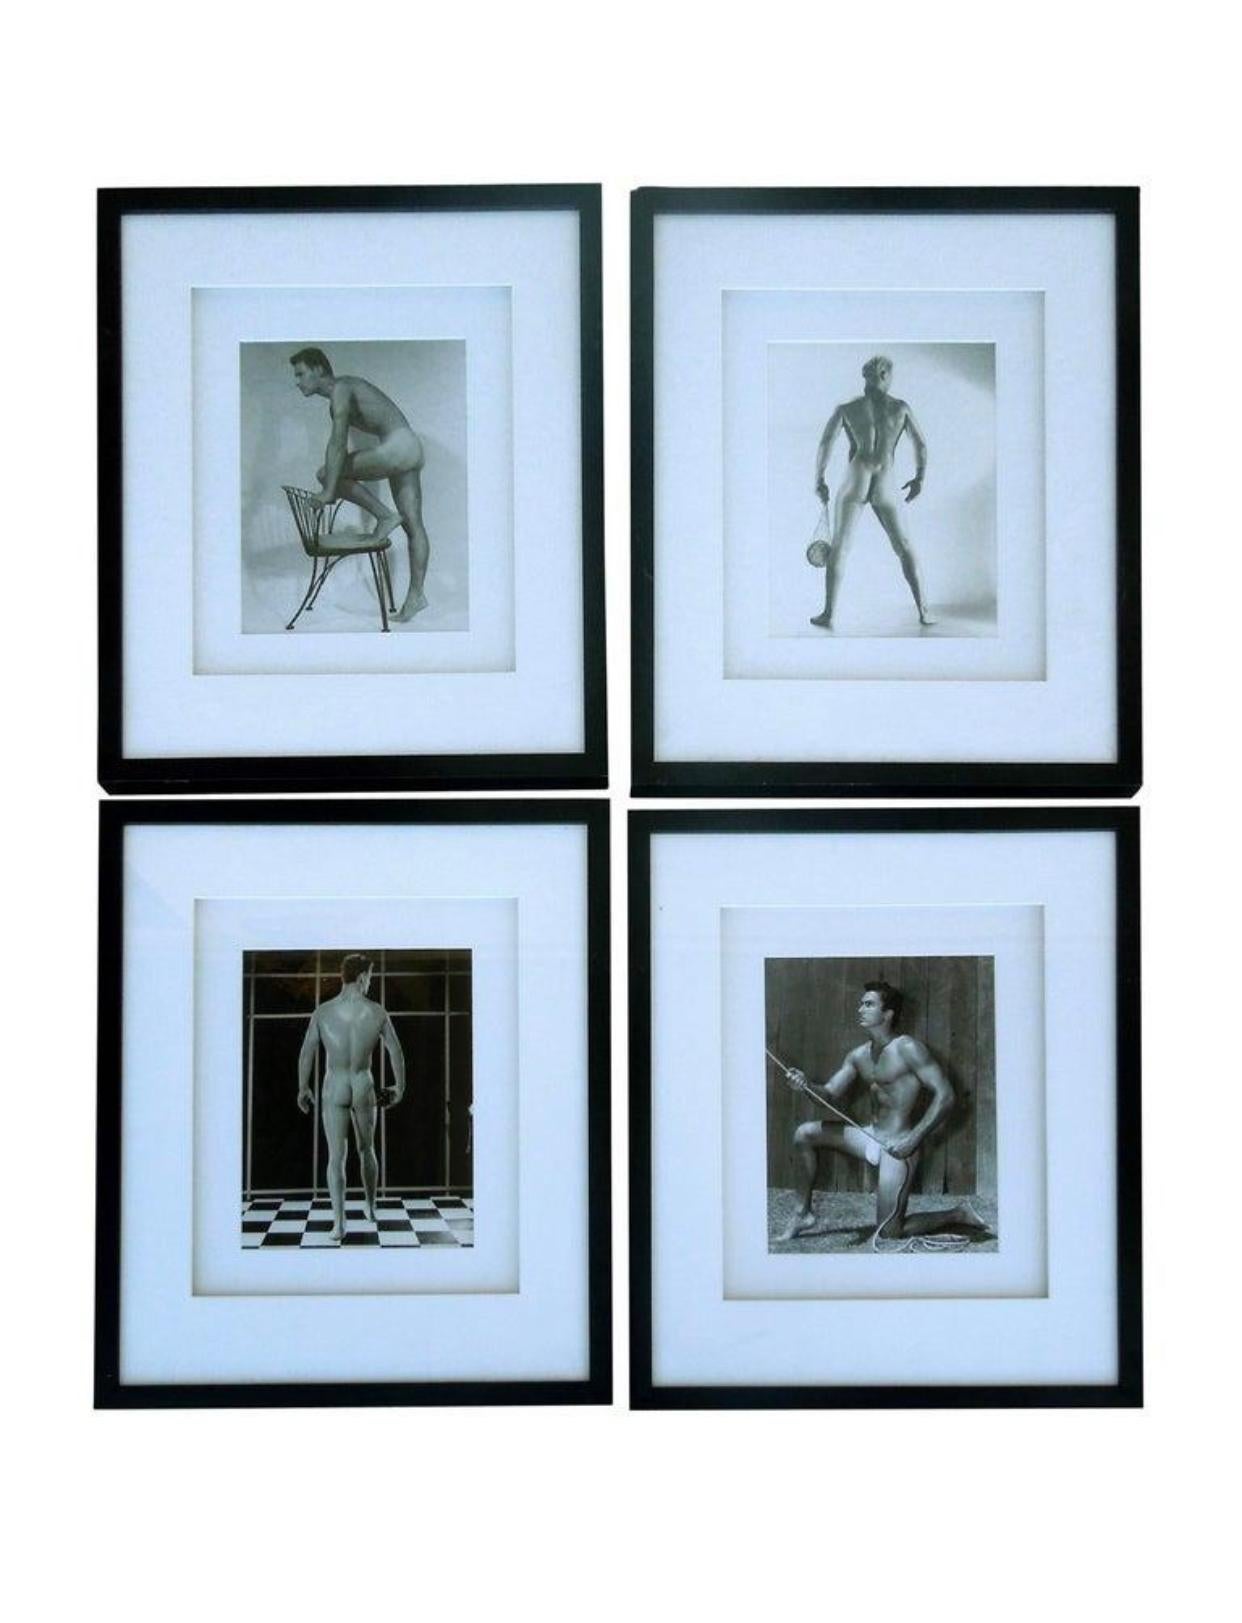 Other Bruce of L.A. (Bruce Bellas) Original 50s Male Nude Photograph Masculine Model For Sale